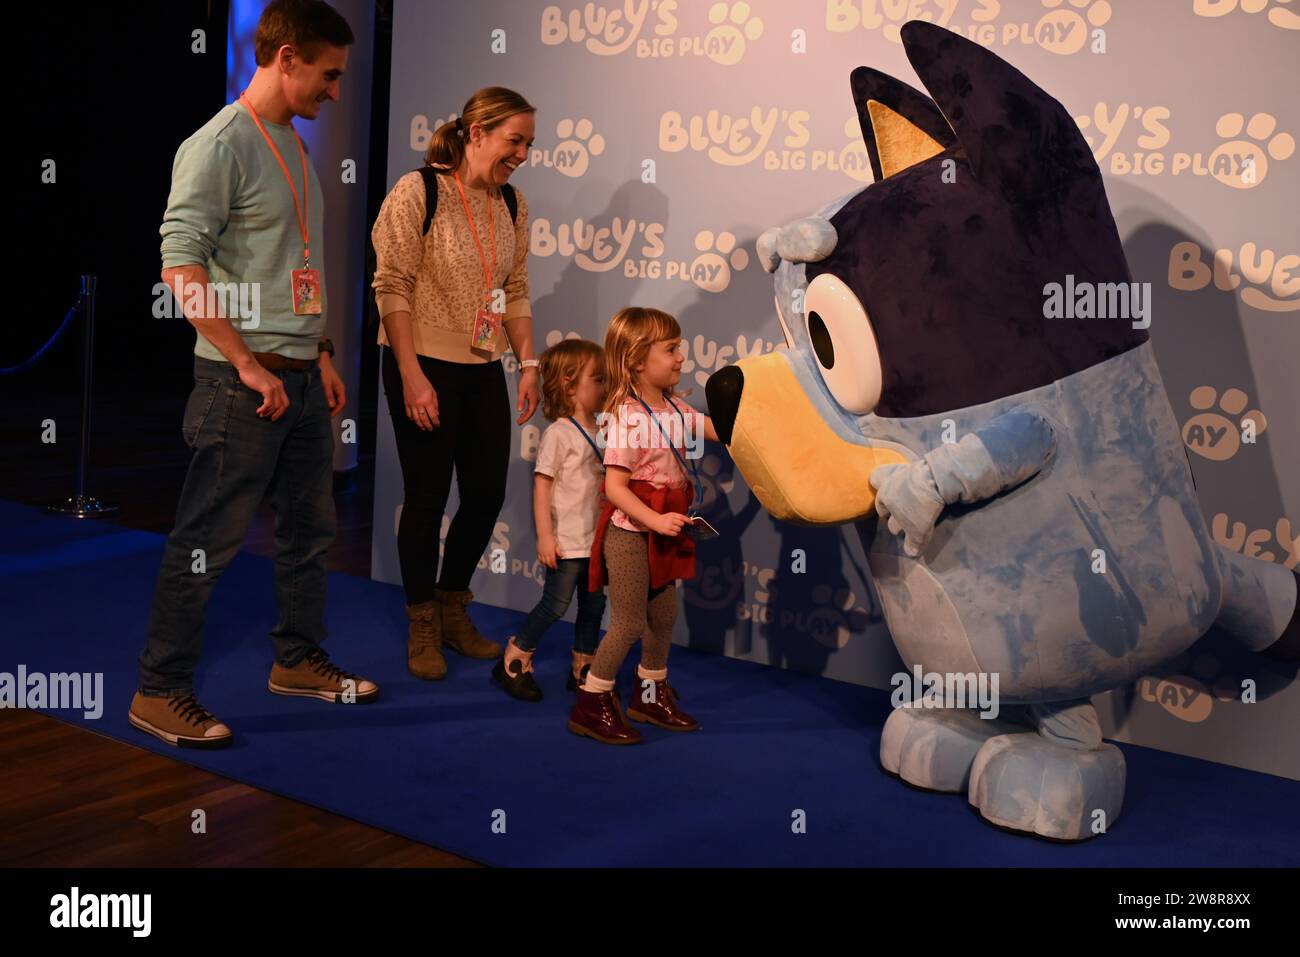 Guests .On Thursday 21 st December celebrities and their families gathered at the Royal Festival Hall in London for a gala performance of Bluey's Big Play , a brand - new theatrical adaptation of the BAFTA & Emmy award-winning children's television series Bluey . produced by Ludo Studion .VIP guests and proud parents who came along to see the stage show's official UK premiere included , Strictly Come Dancing stars James and Ola Jordan ,Rachel Riley and her husband Pasha Kovalev ,comedian and TV presenter Katherine Ryan , rapper Professor Green ,Westlife's Brian McFadden .JLS star turned farmer Stock Photo